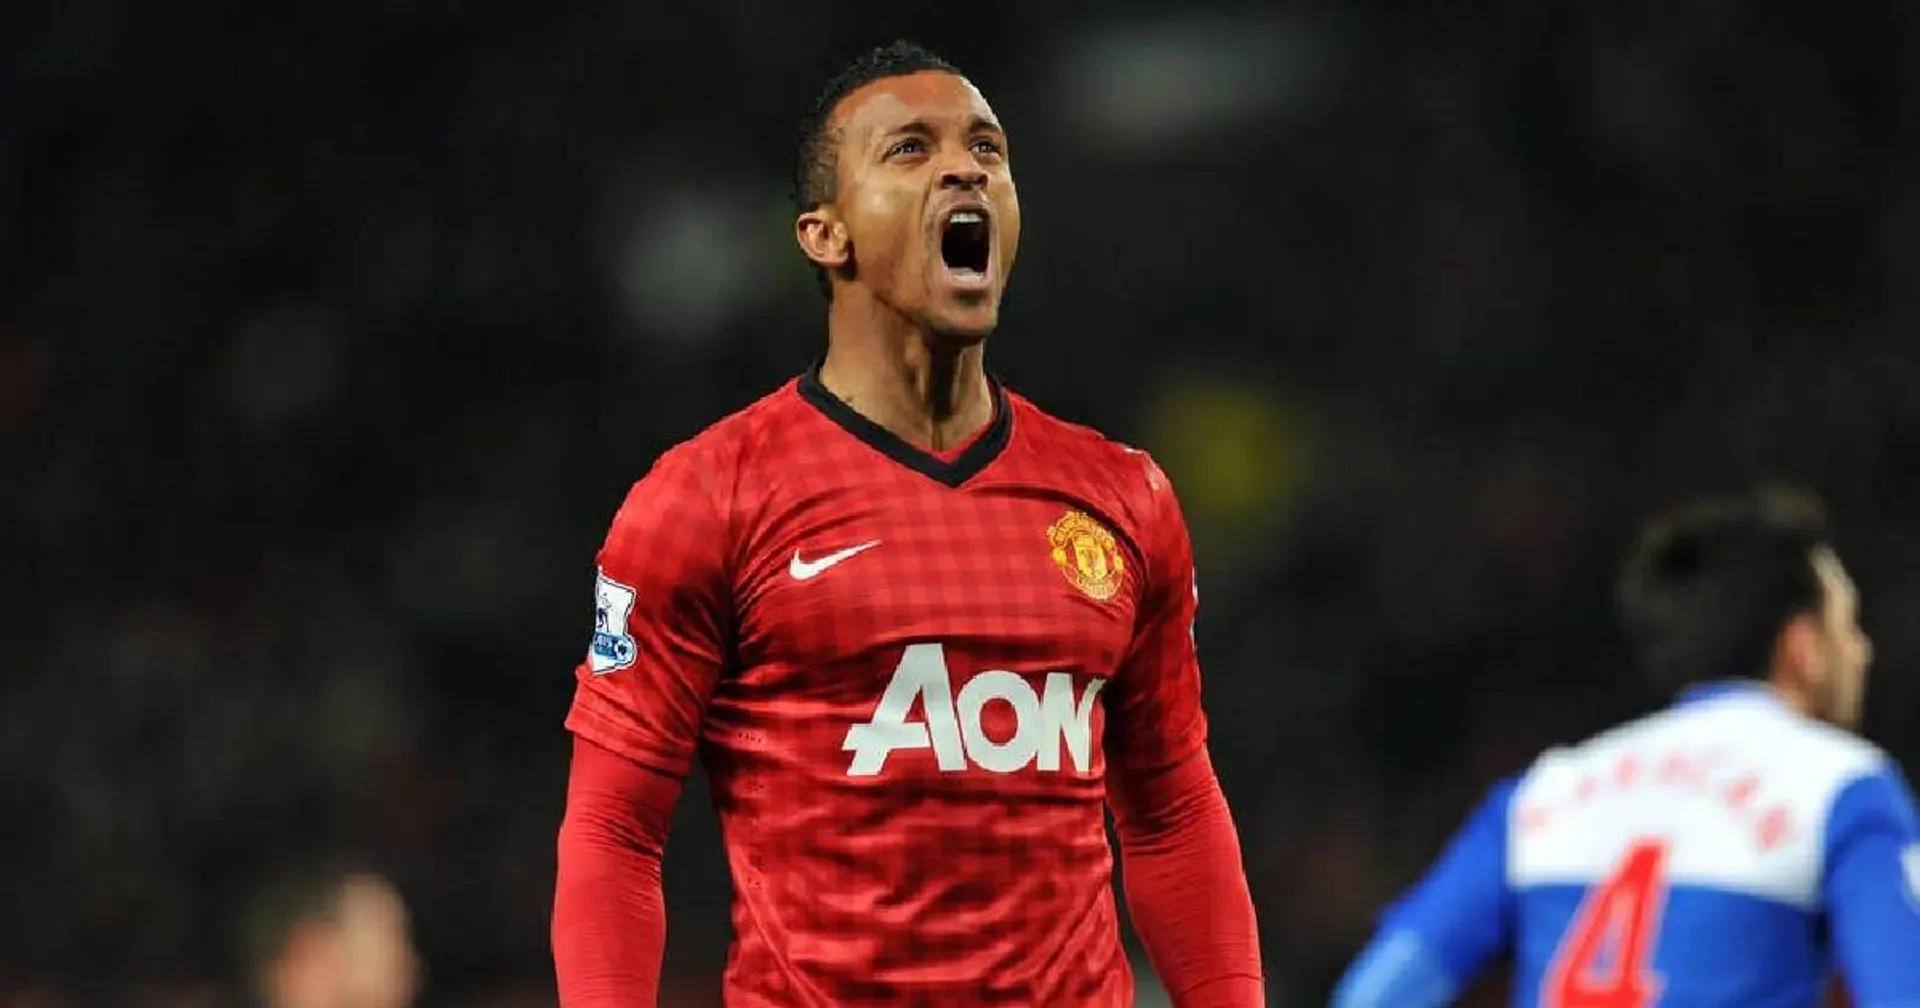 Nani reveals he signed for Man United rejecting all other offers, including Madrid's